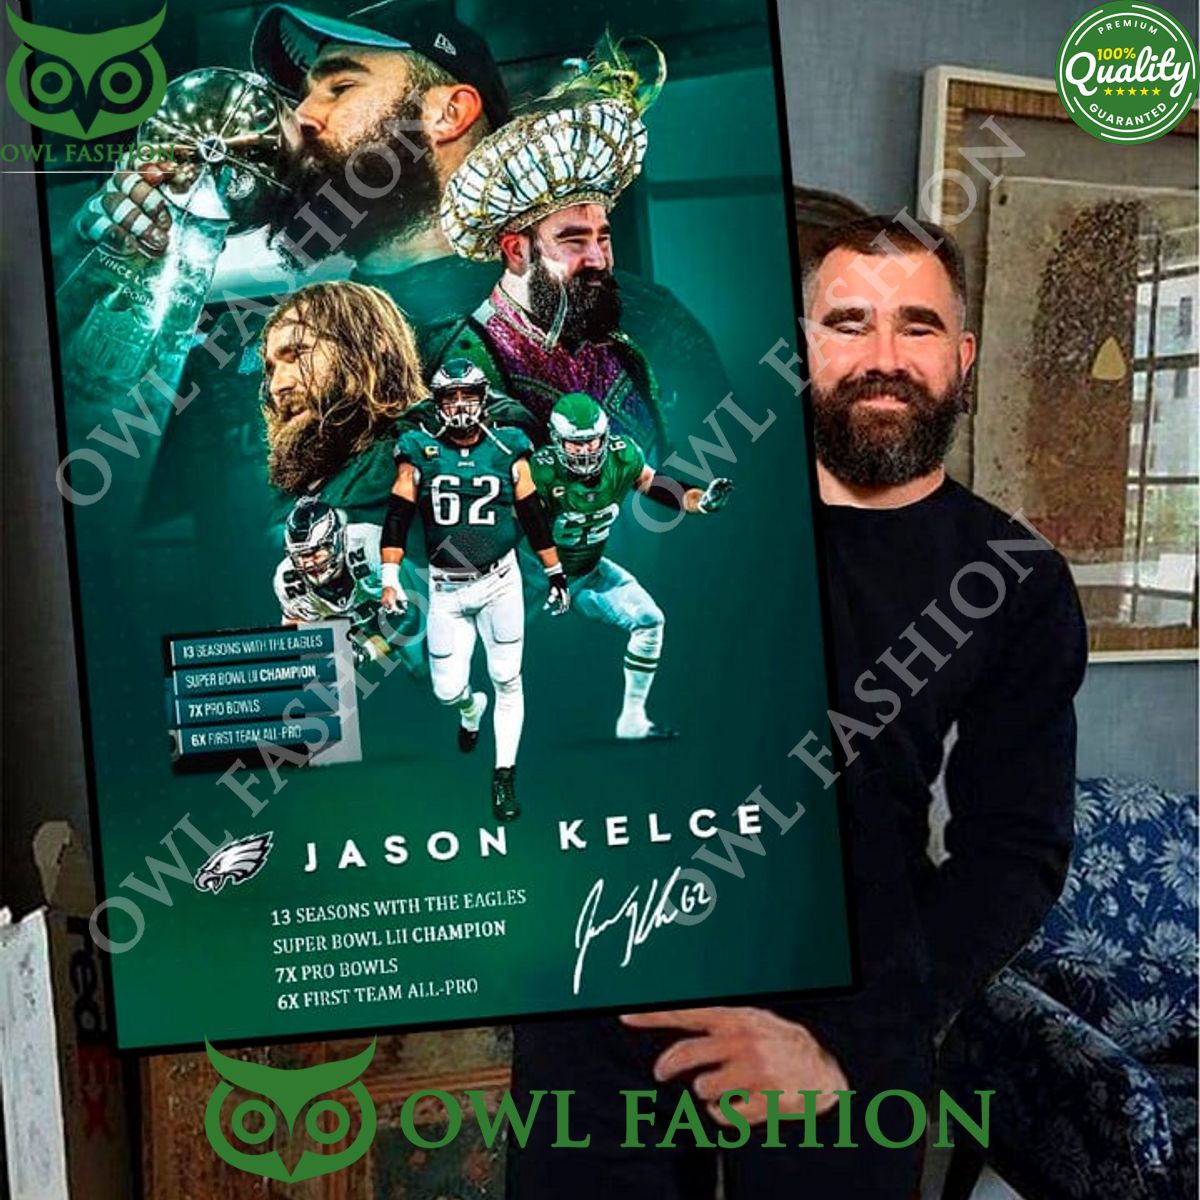 jason kelce 13 seasons with the eagles super bowl lii champion legender poster 1 ICDL5.jpg